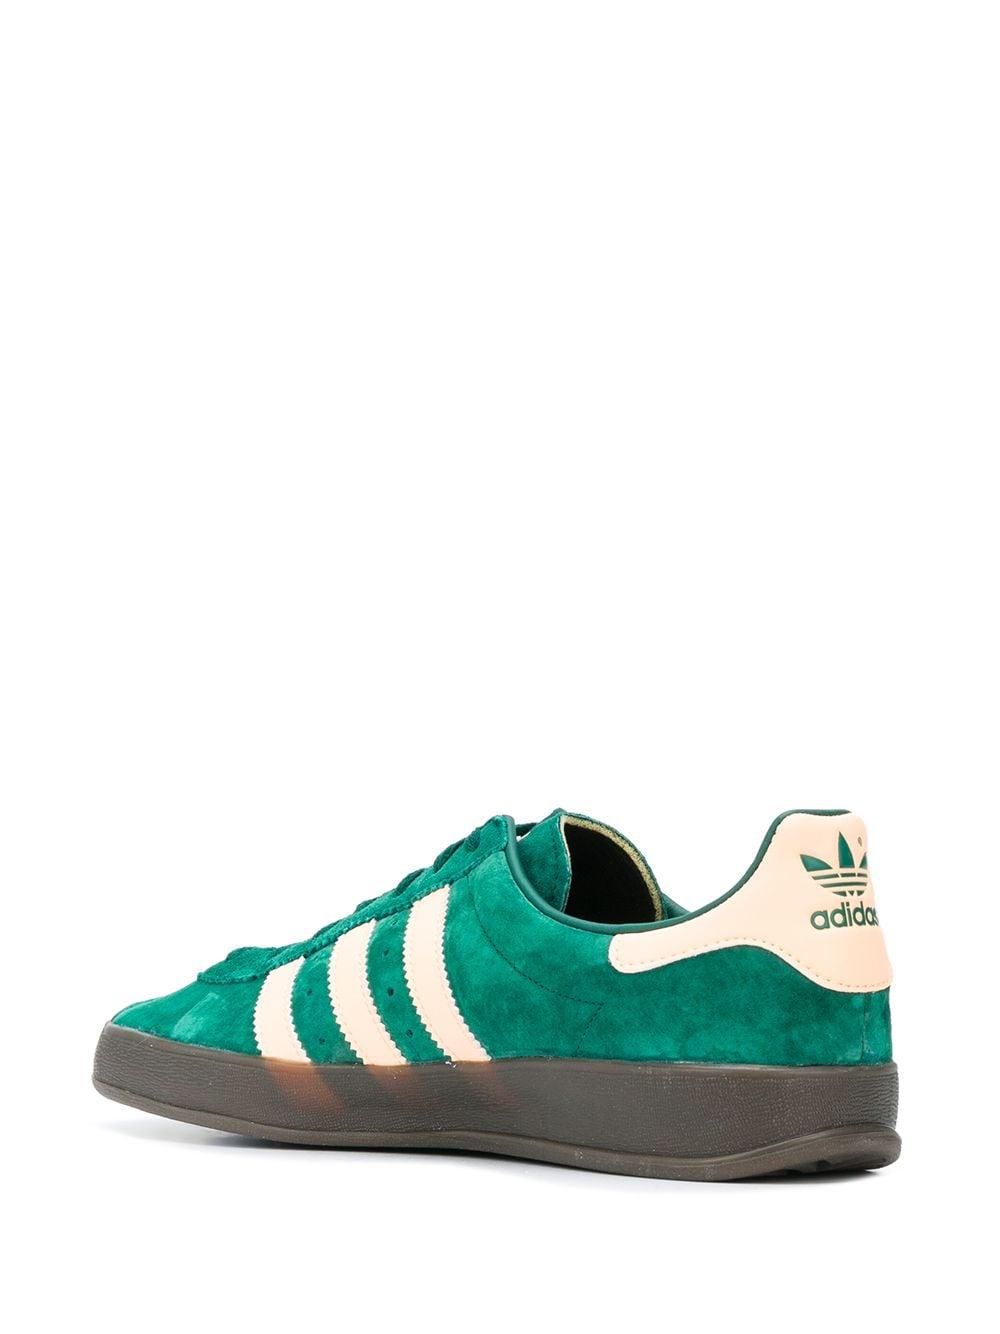 adidas Originals Broomfield Trainers in Green for Men | Lyst